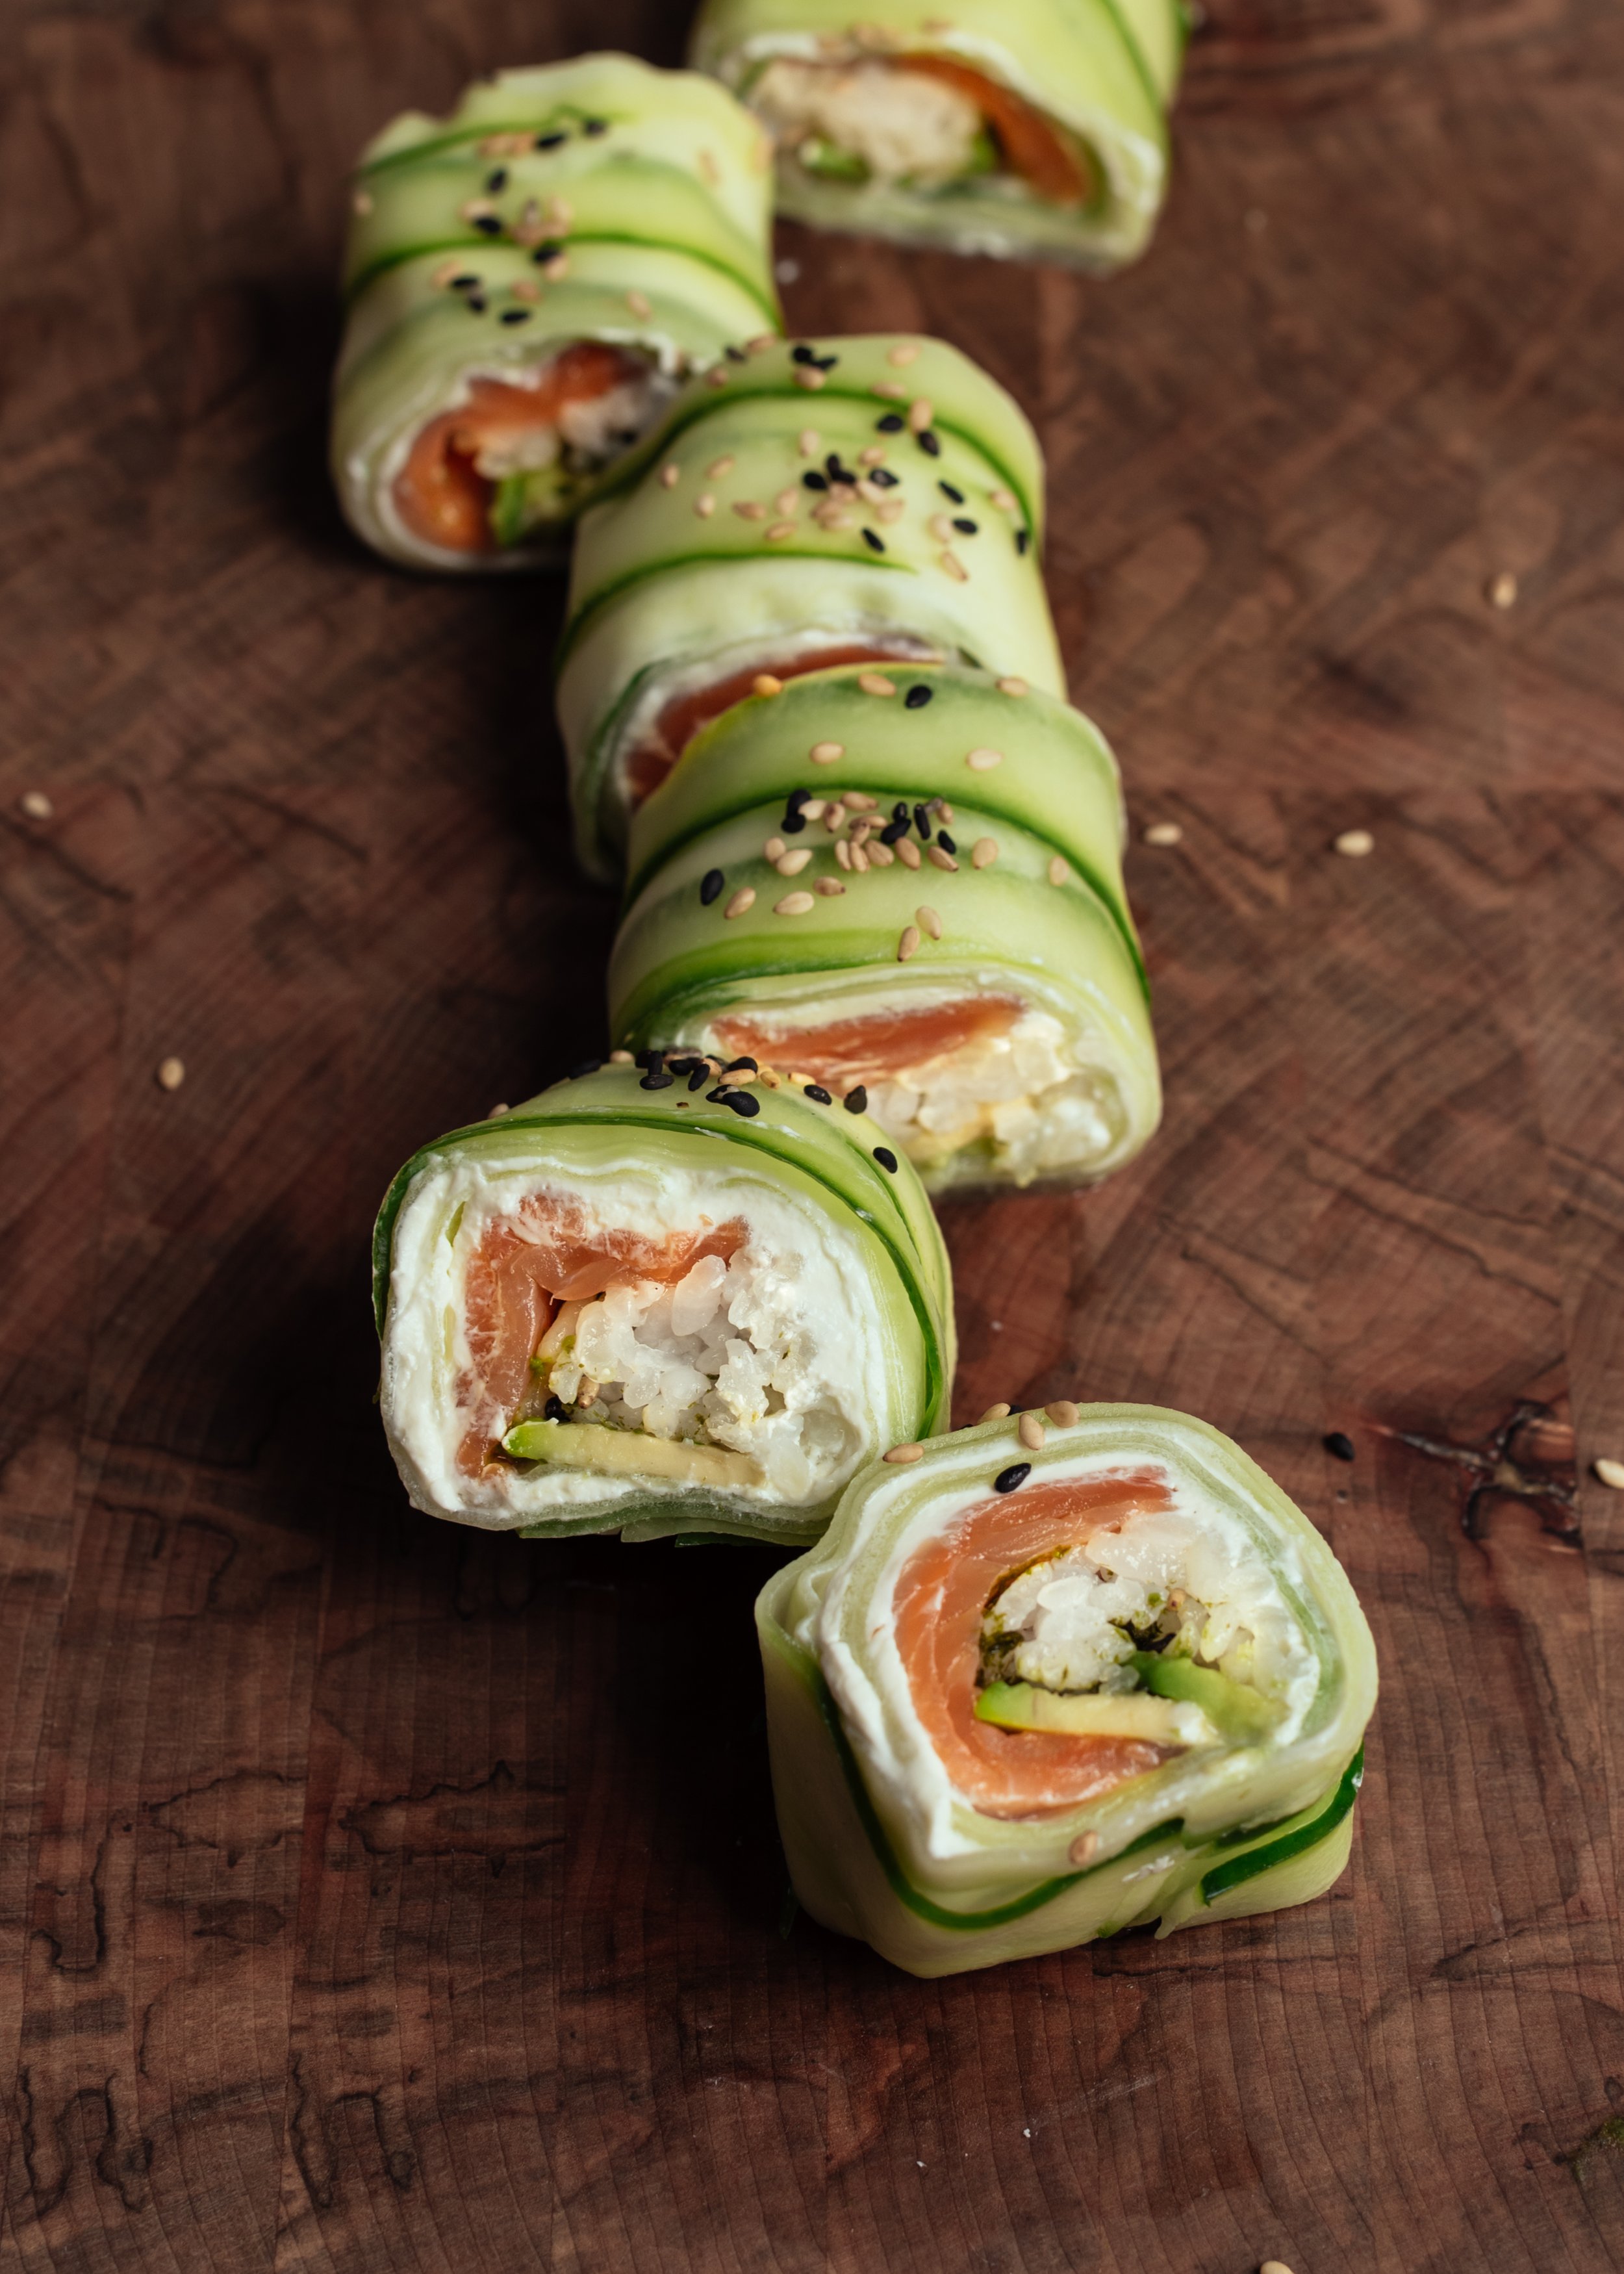 Cucumber Sushi Roll - FeelGoodFoodie